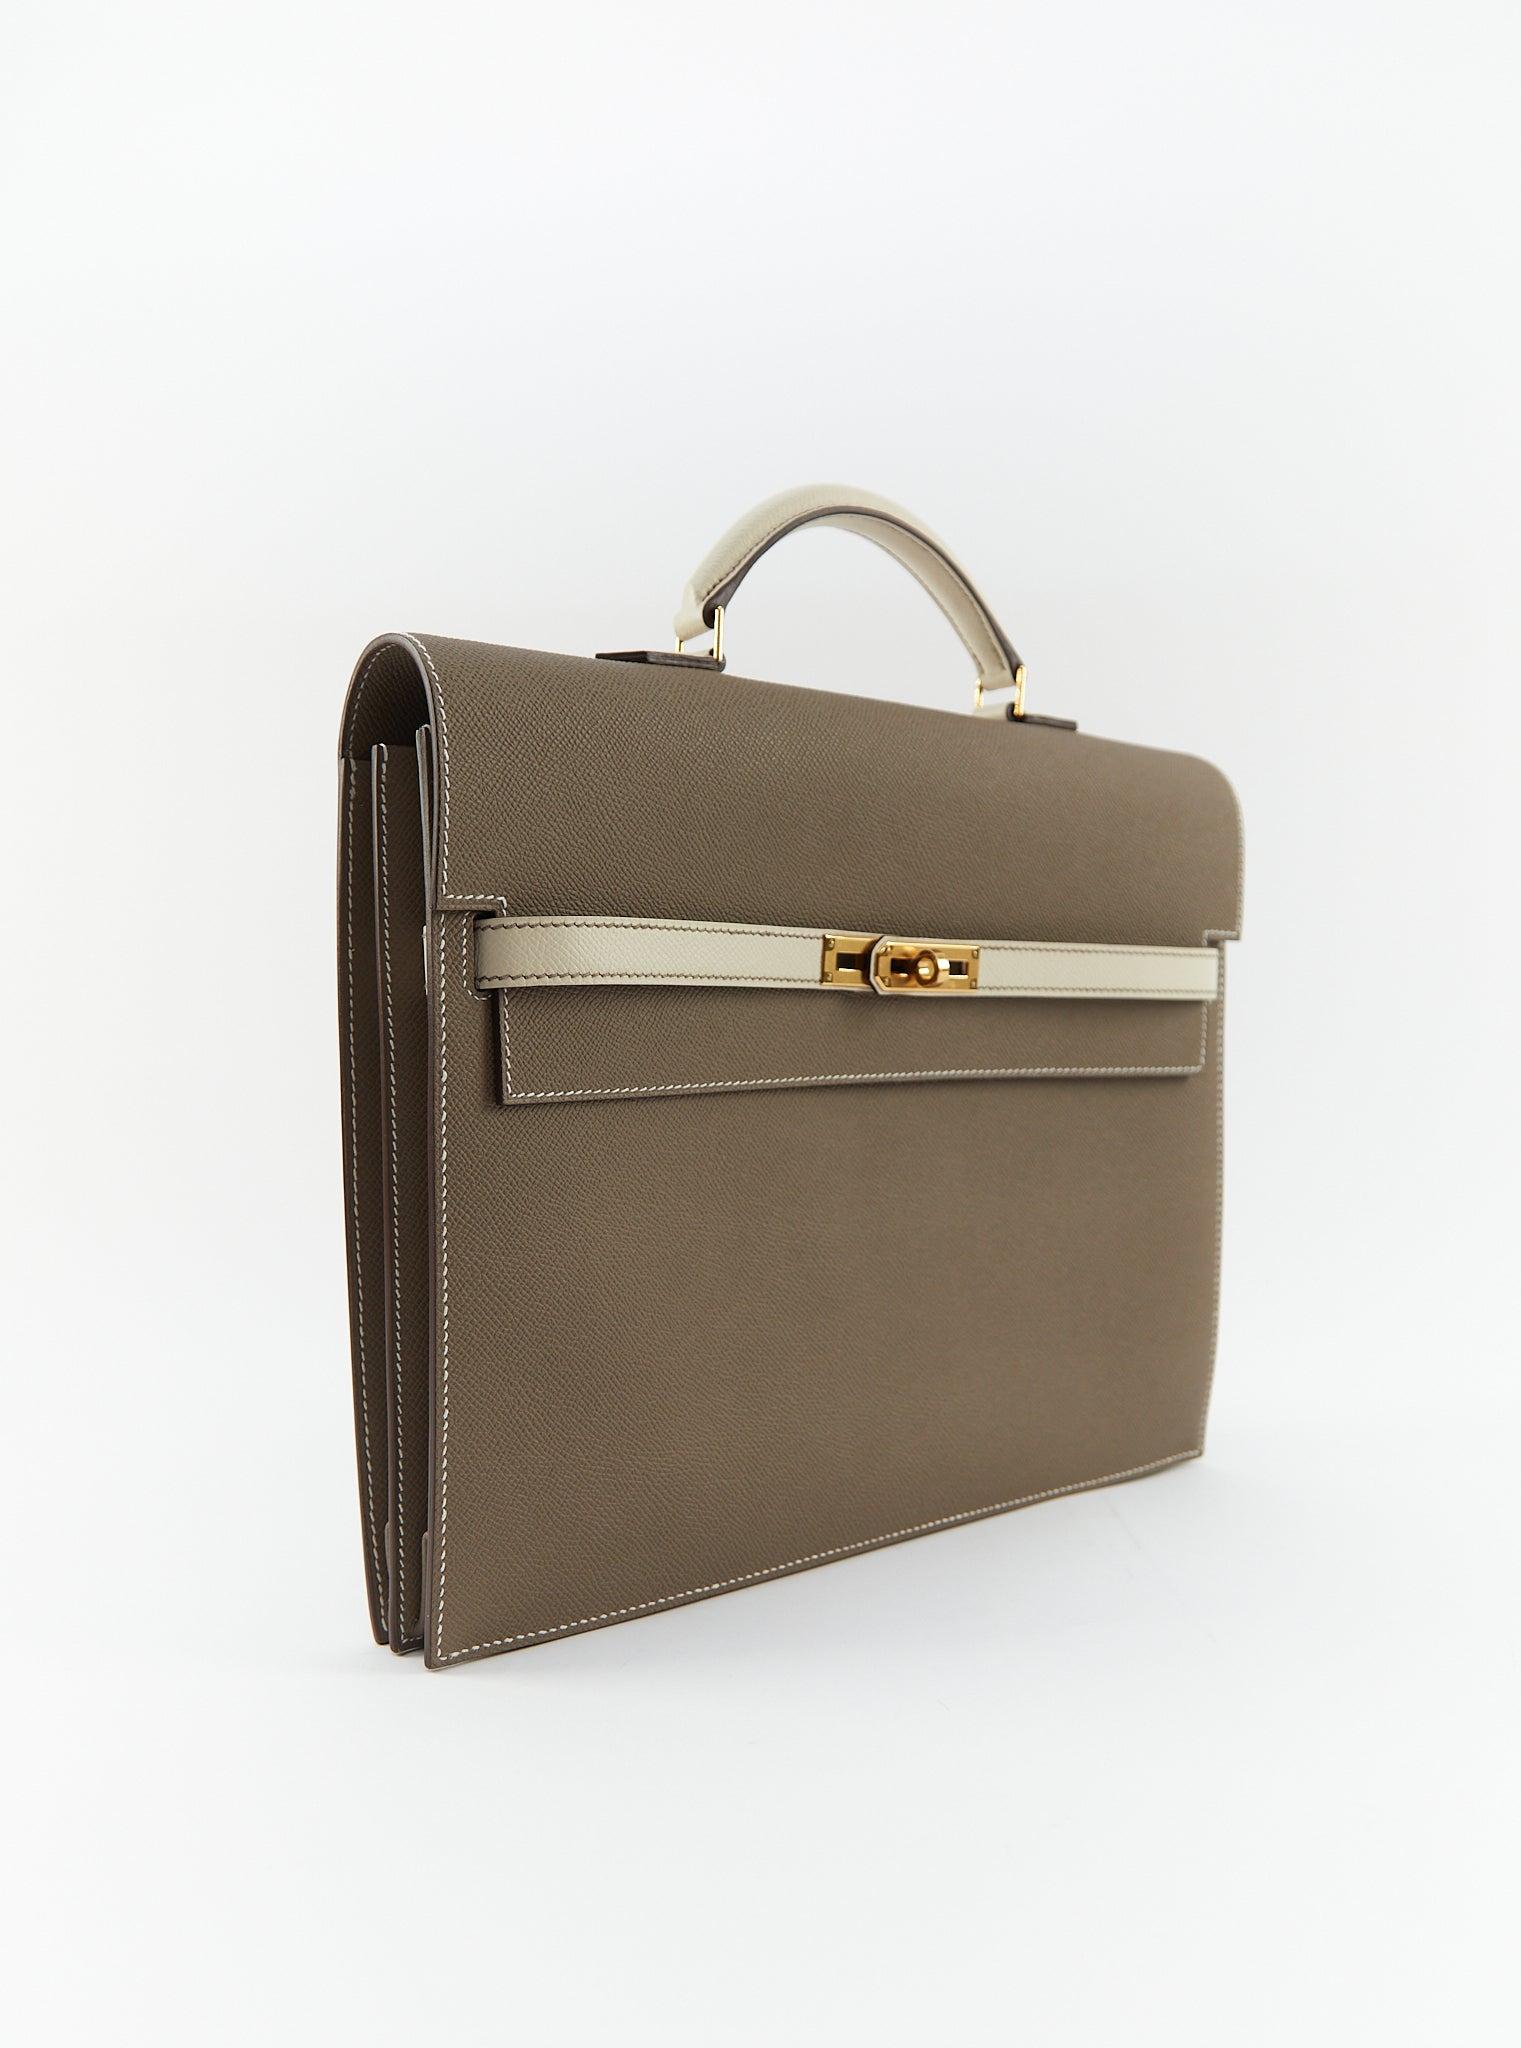 HERMÈS KELLY DEPECHES 34CM HSS SPECIAL ORDERE ETOUPE & CRAIE Epsom Leather with  In Excellent Condition For Sale In London, GB